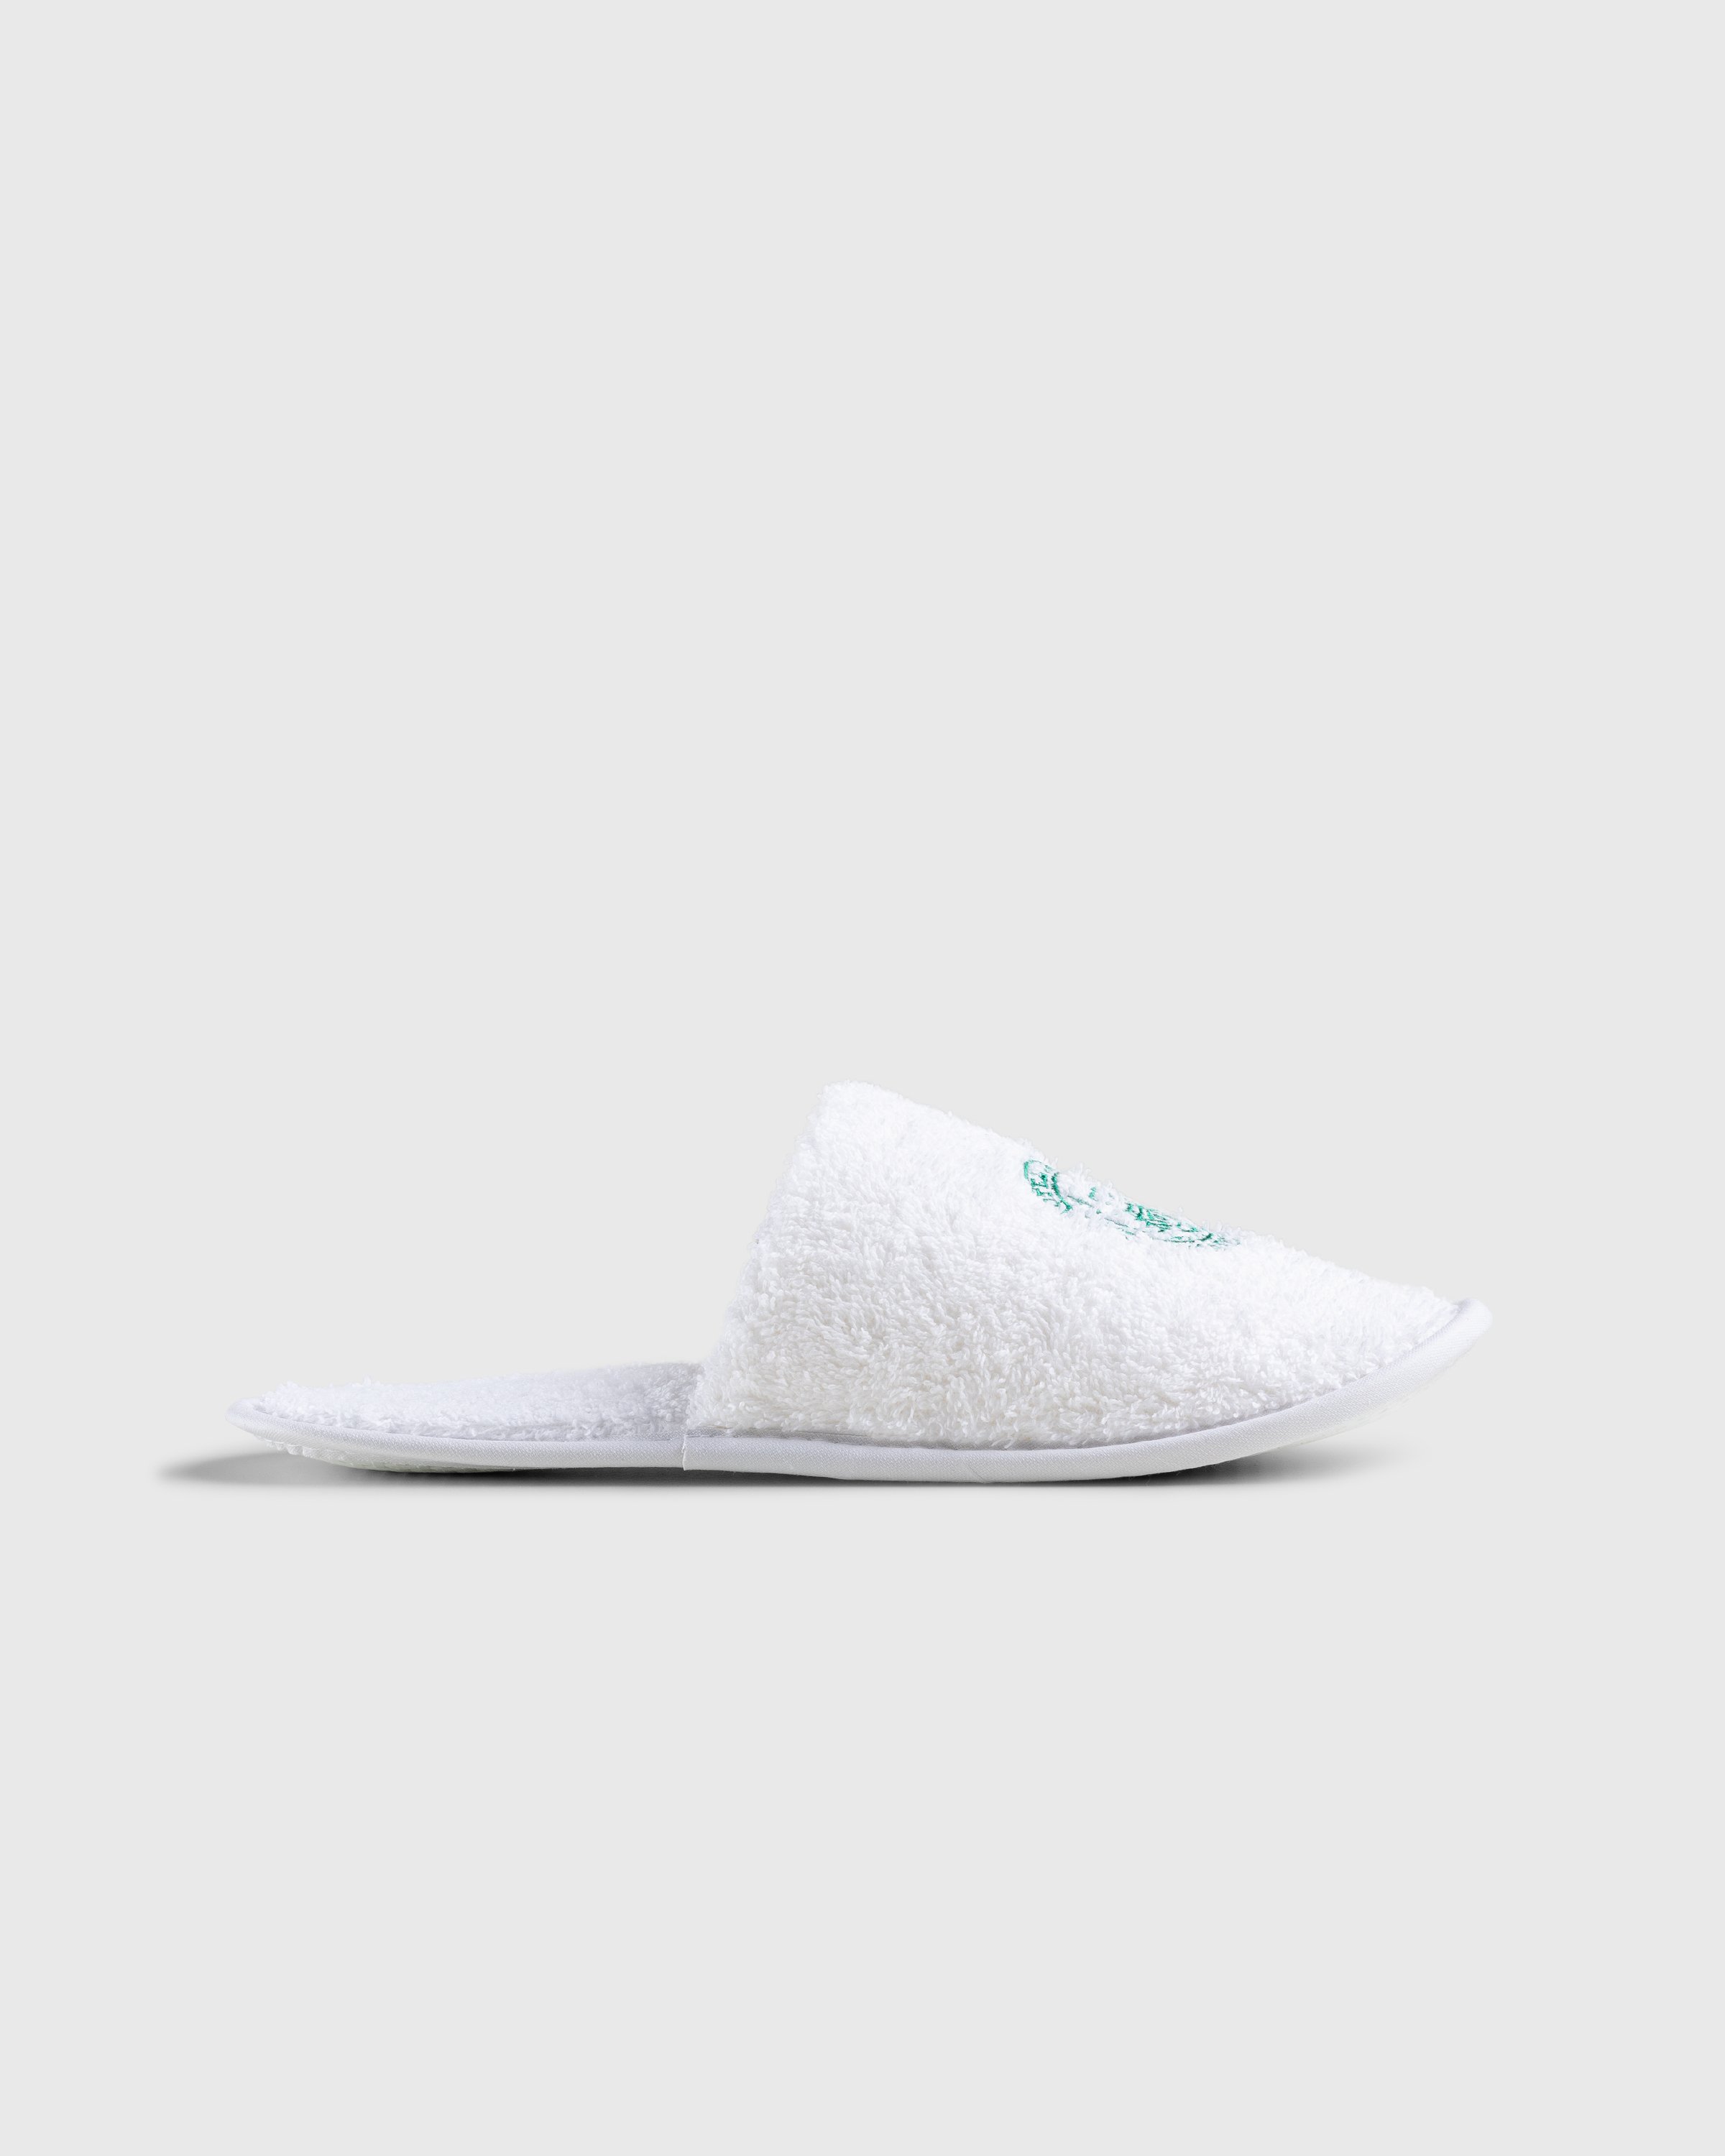 Hotel Amour x Highsnobiety - Not In Paris 4 Slippers White - Footwear - White - Image 2